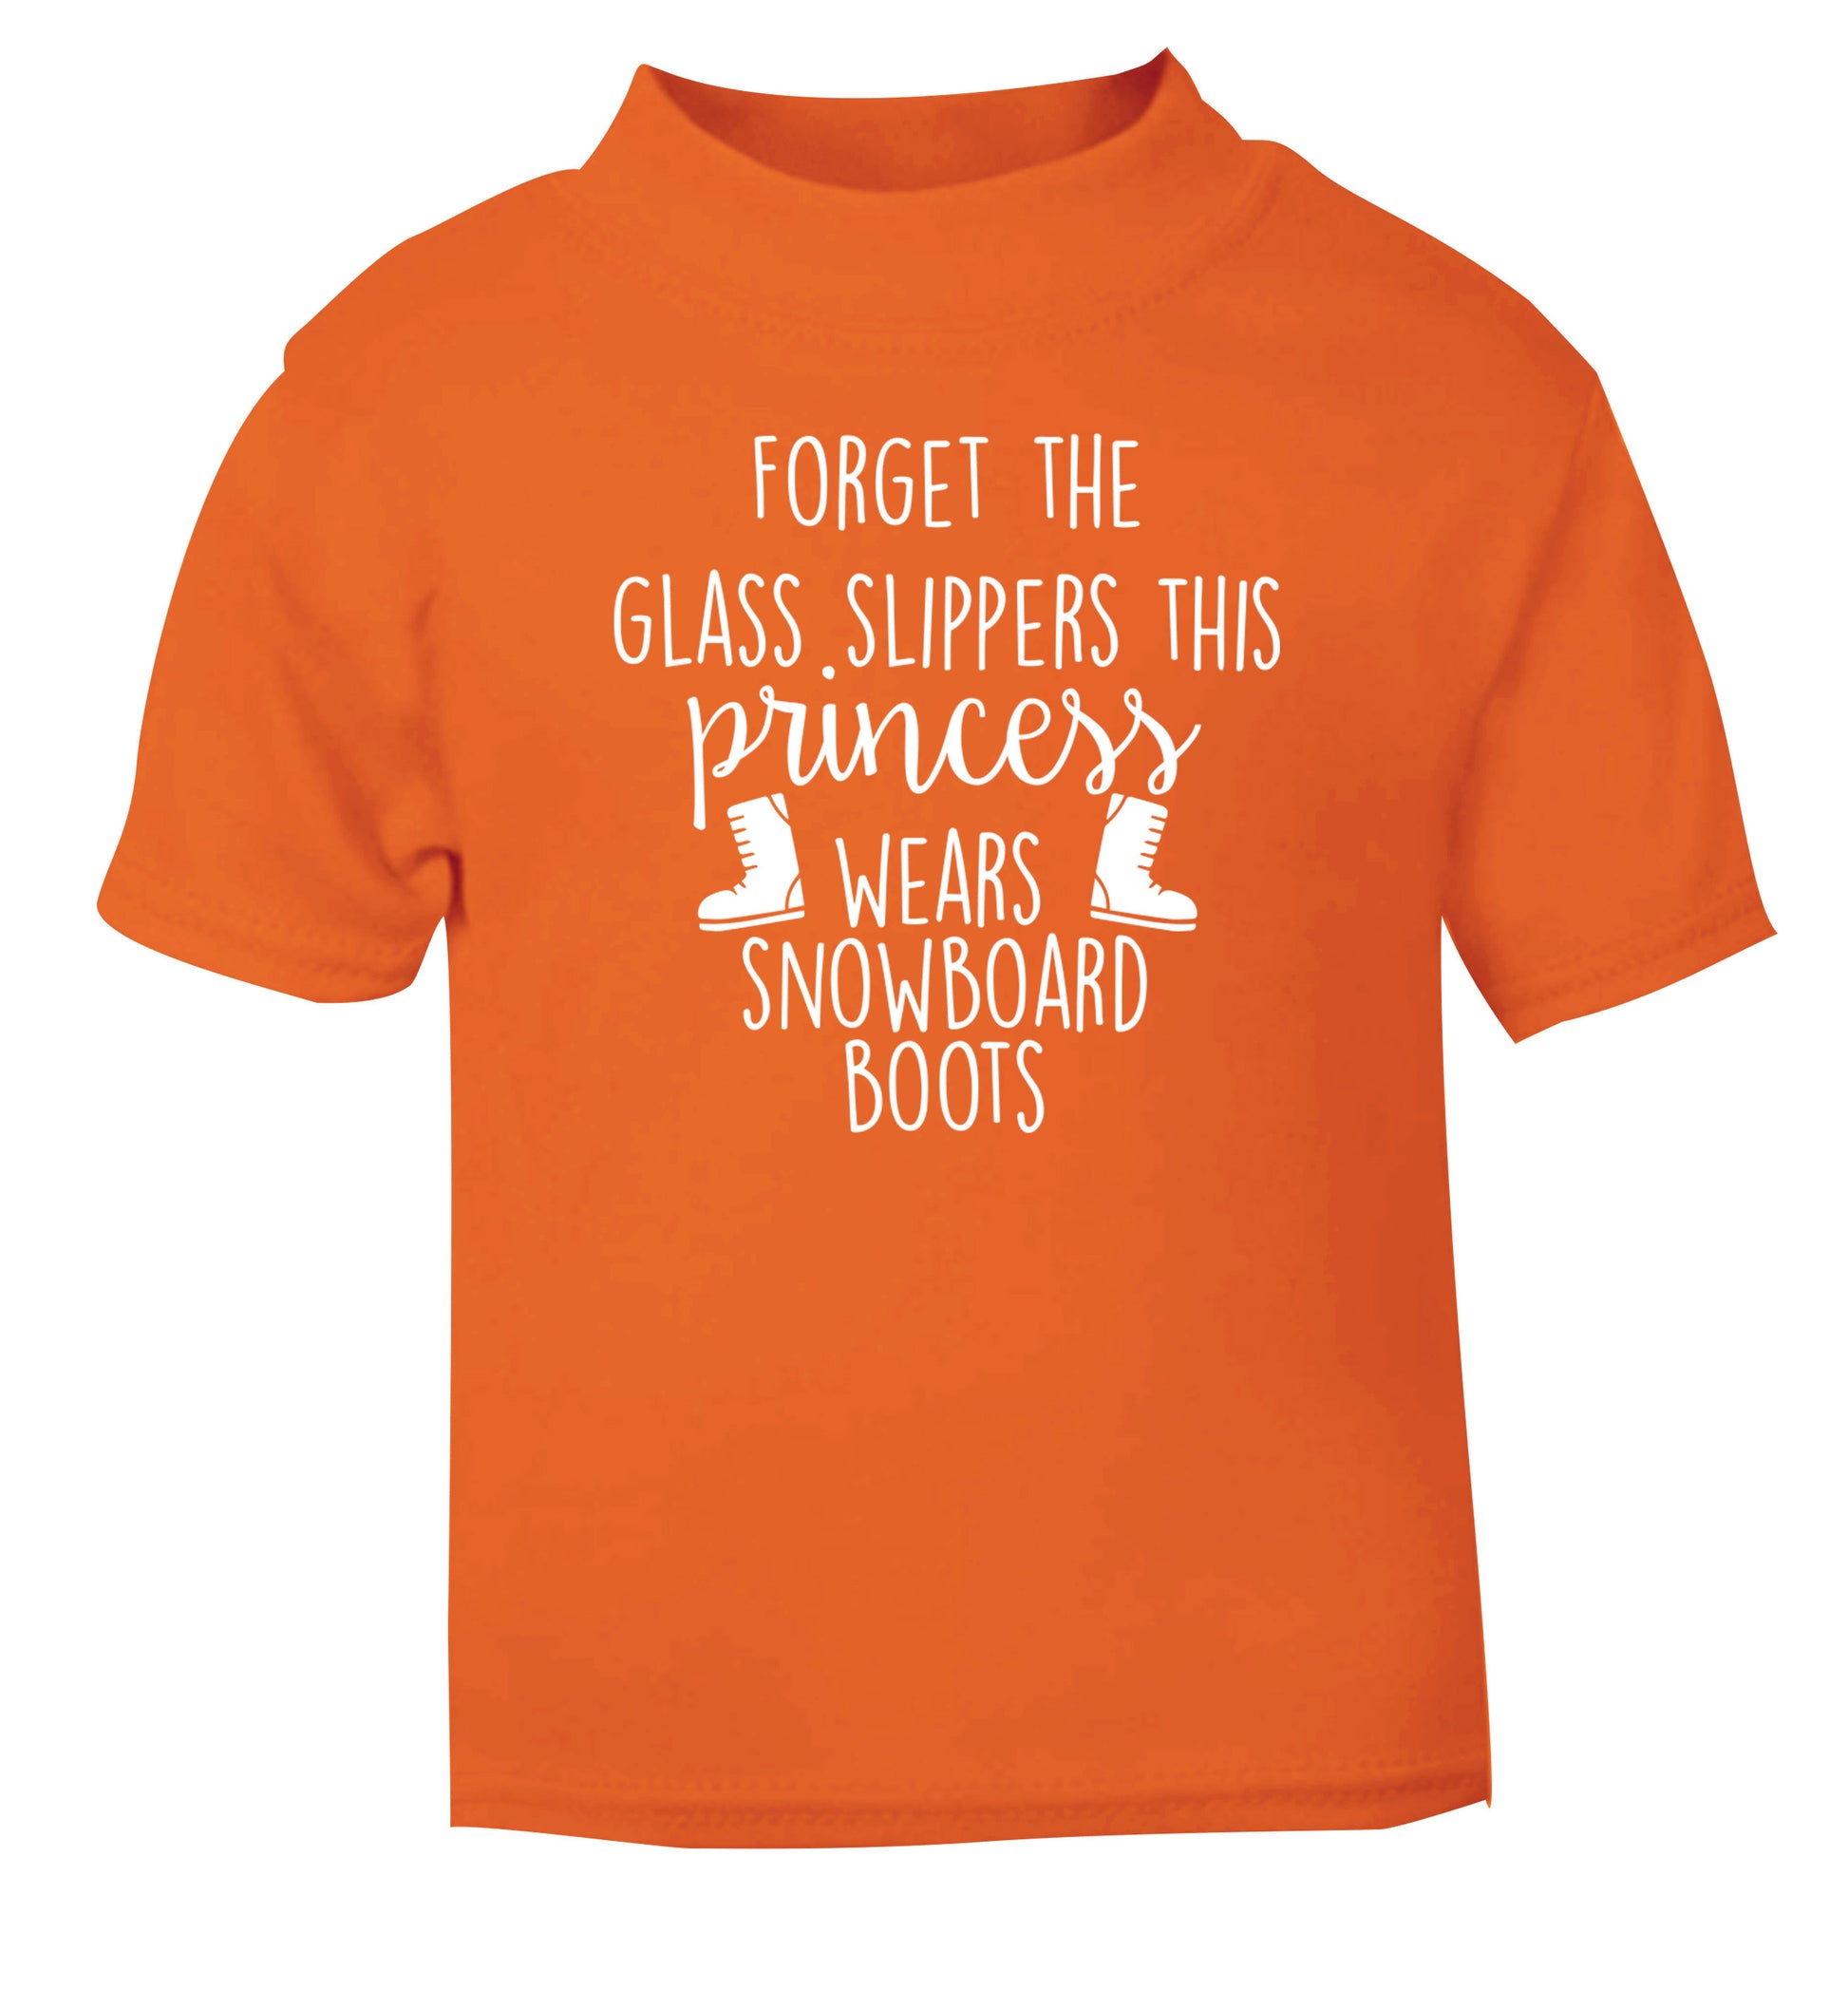 Forget the glass slippers this princess wears snowboard boots orange Baby Toddler Tshirt 2 Years